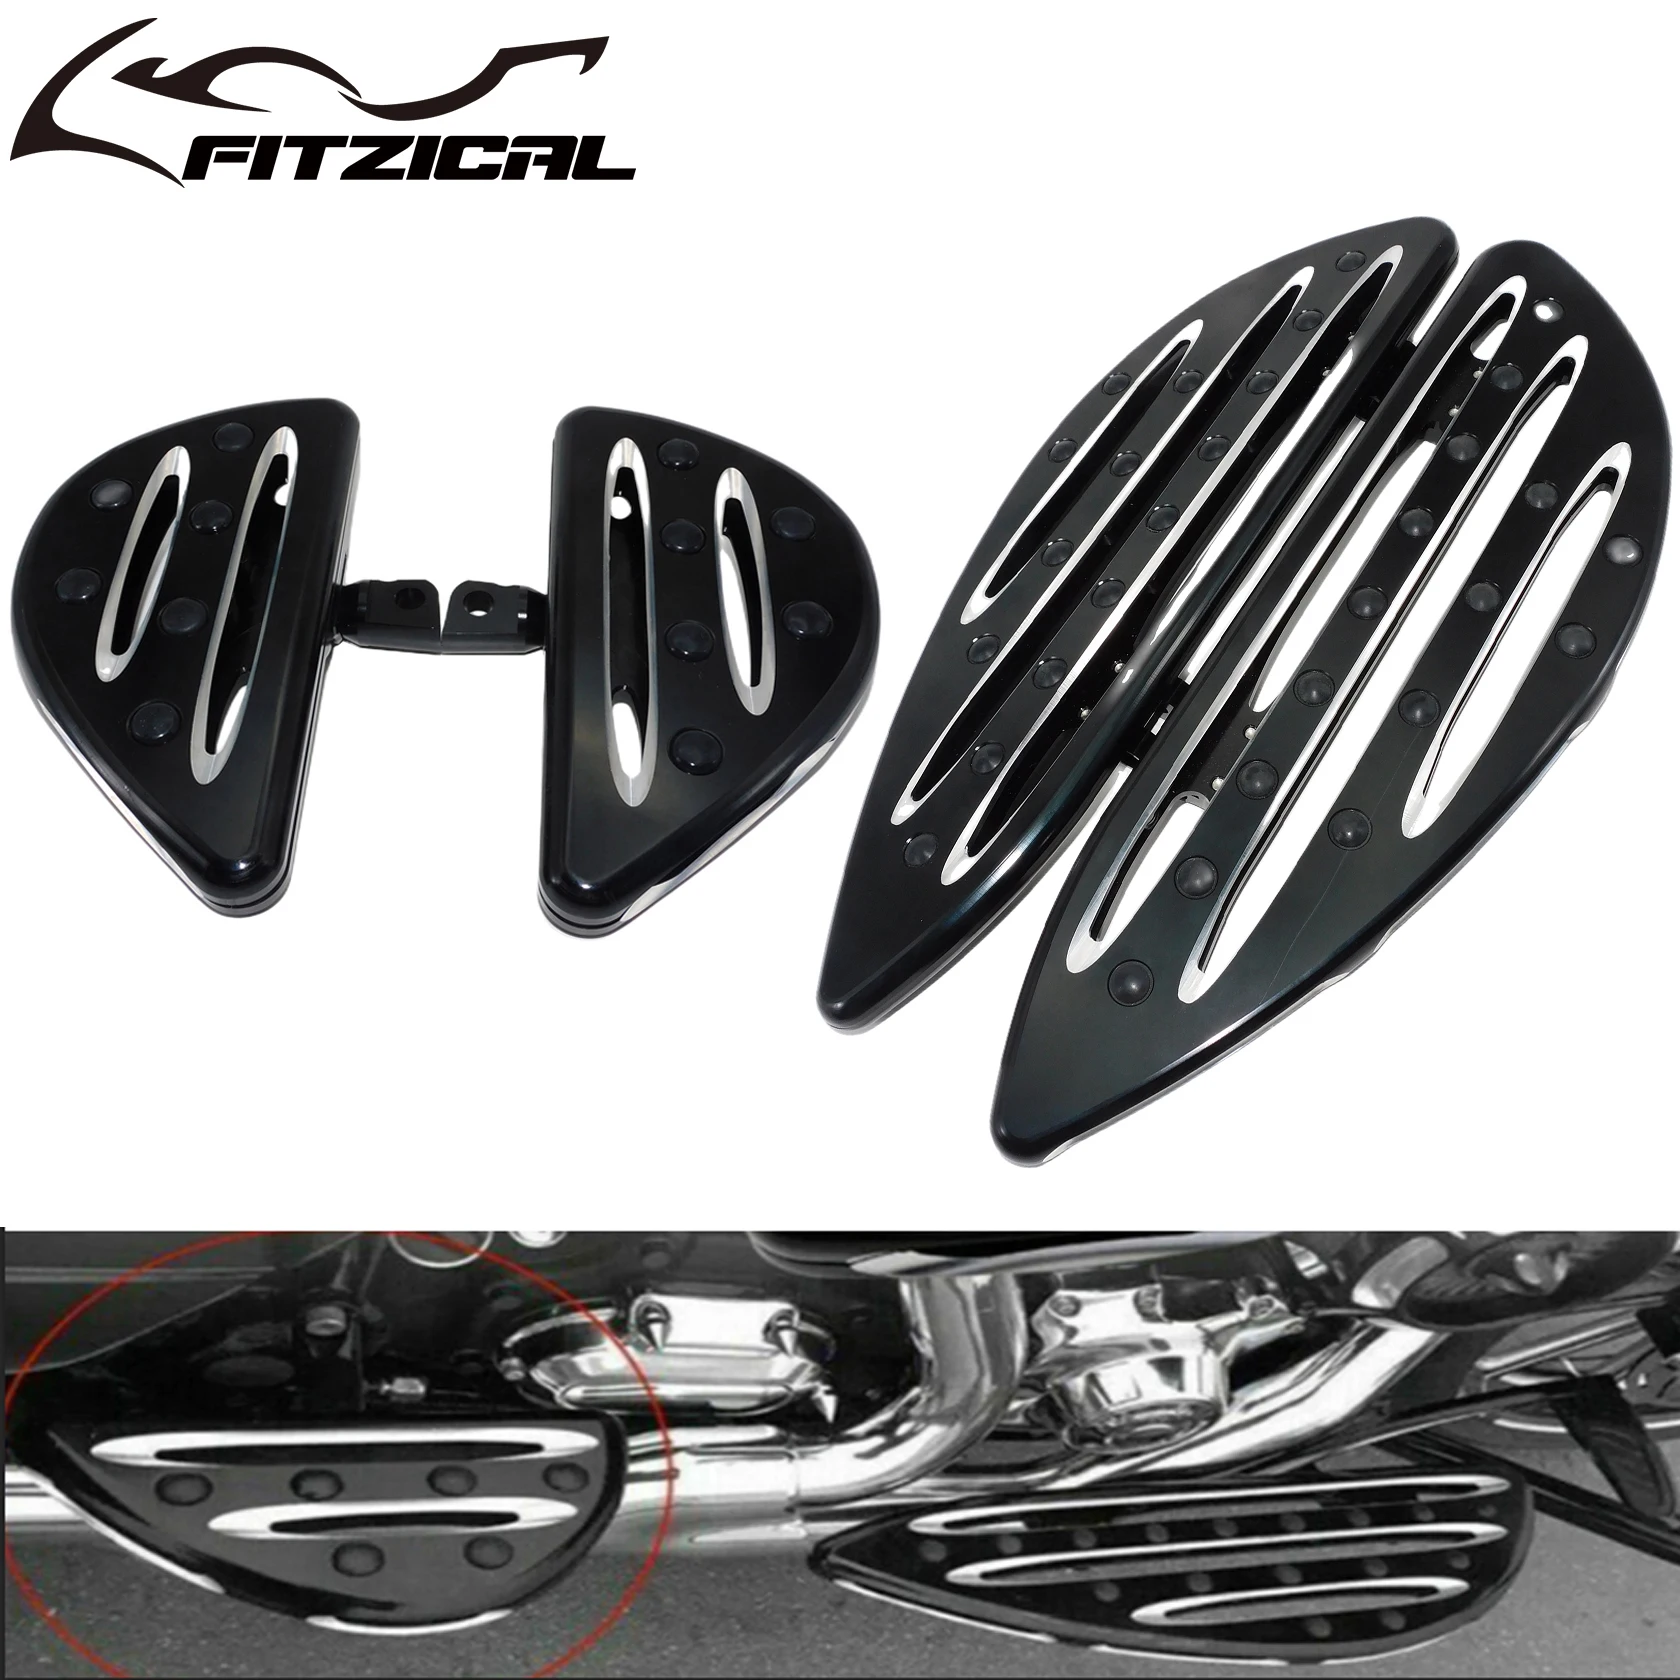 

Motorcycle Driver Front Floorboard Passenger Rear Footpeg Footrest Pedal For Harley Touring Glide Softail FL Dyna Sportster XL